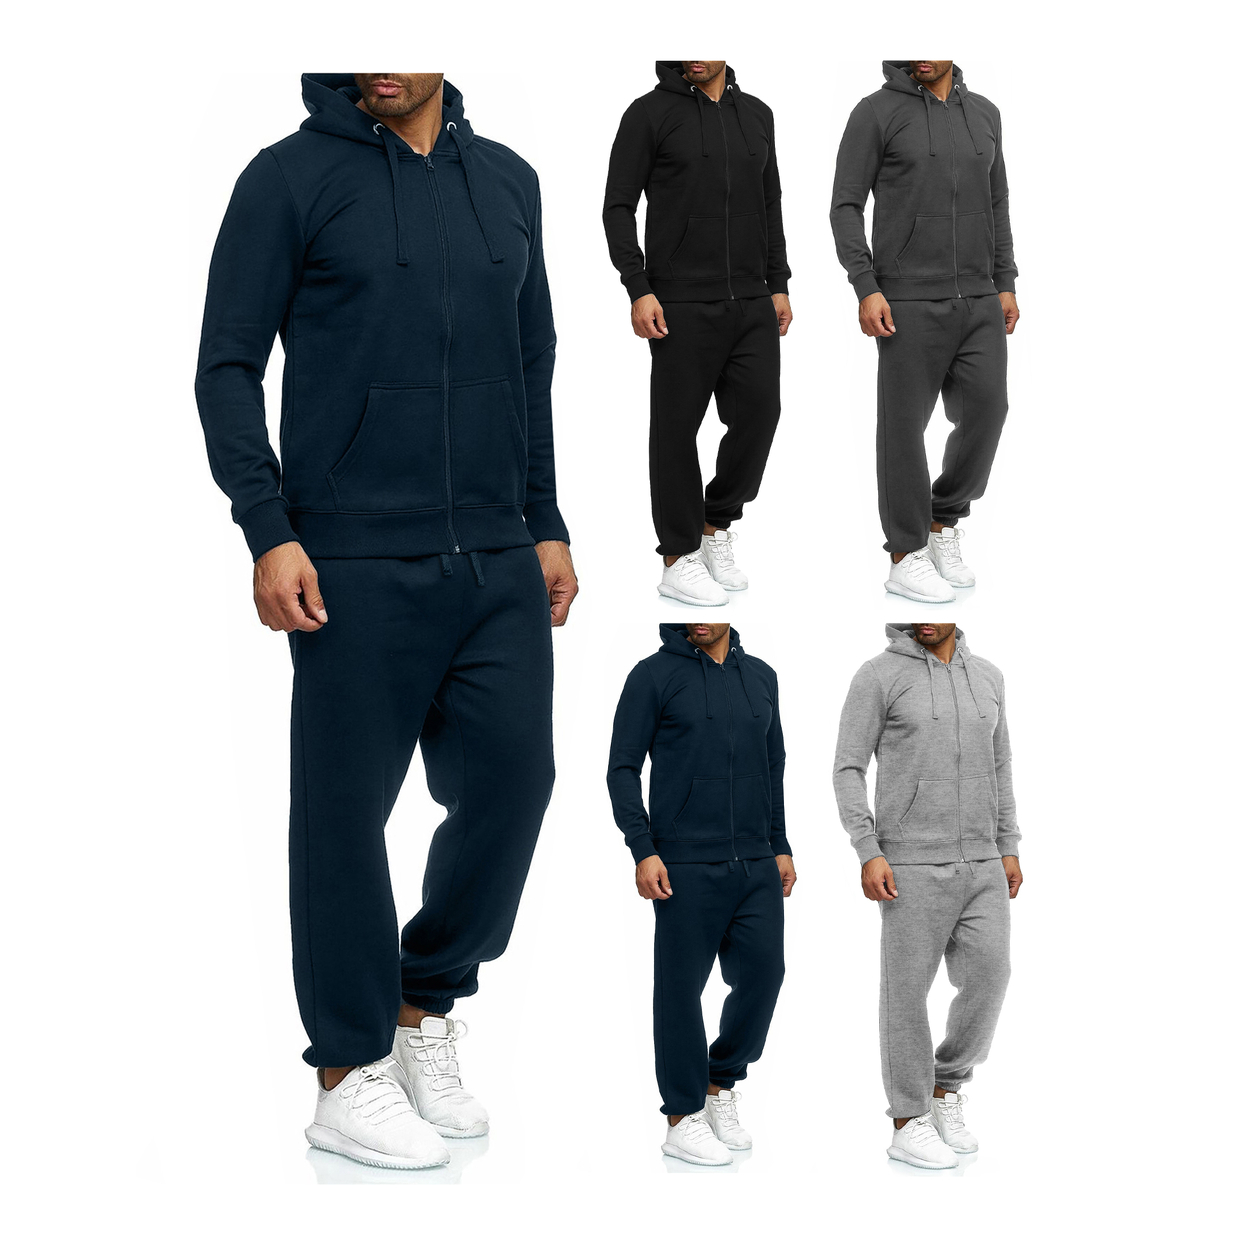 Men's Casual Big & Tall Athletic Active Winter Warm Fleece Lined Full Zip Tracksuit Jogger Set - Charcoal, X-large